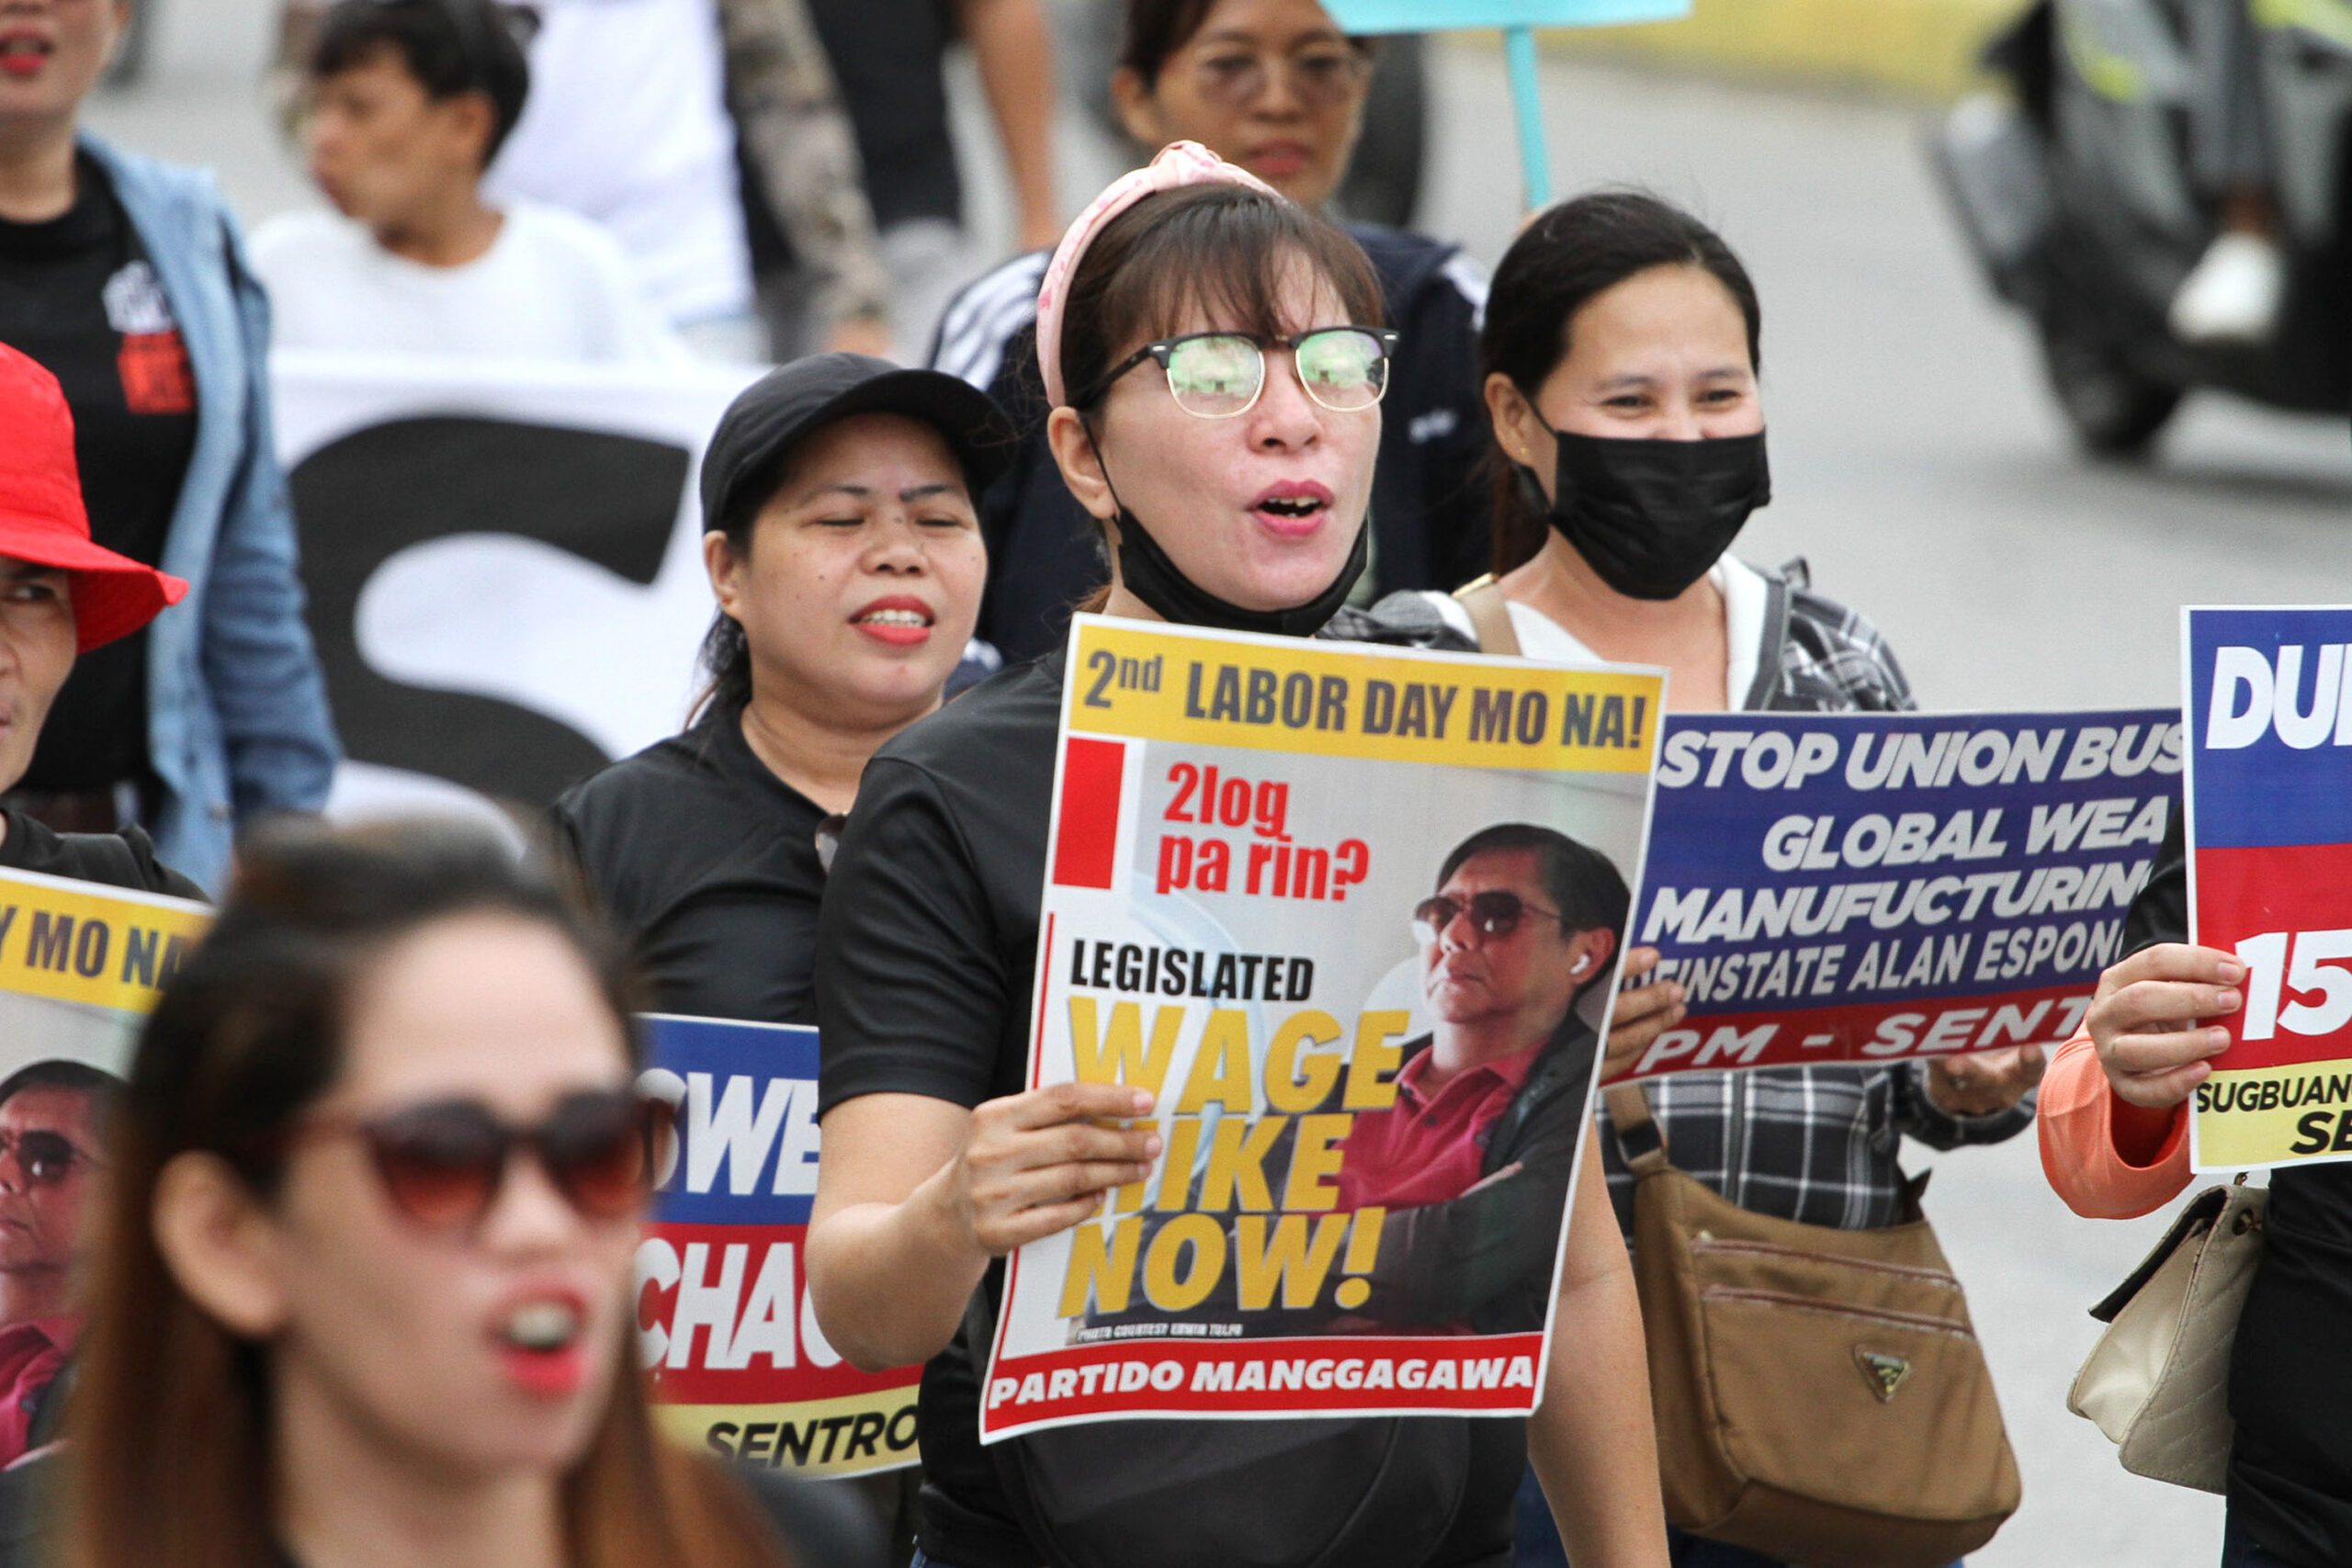 In Cebu, workers call for wage hikes to offset impact of El Niño